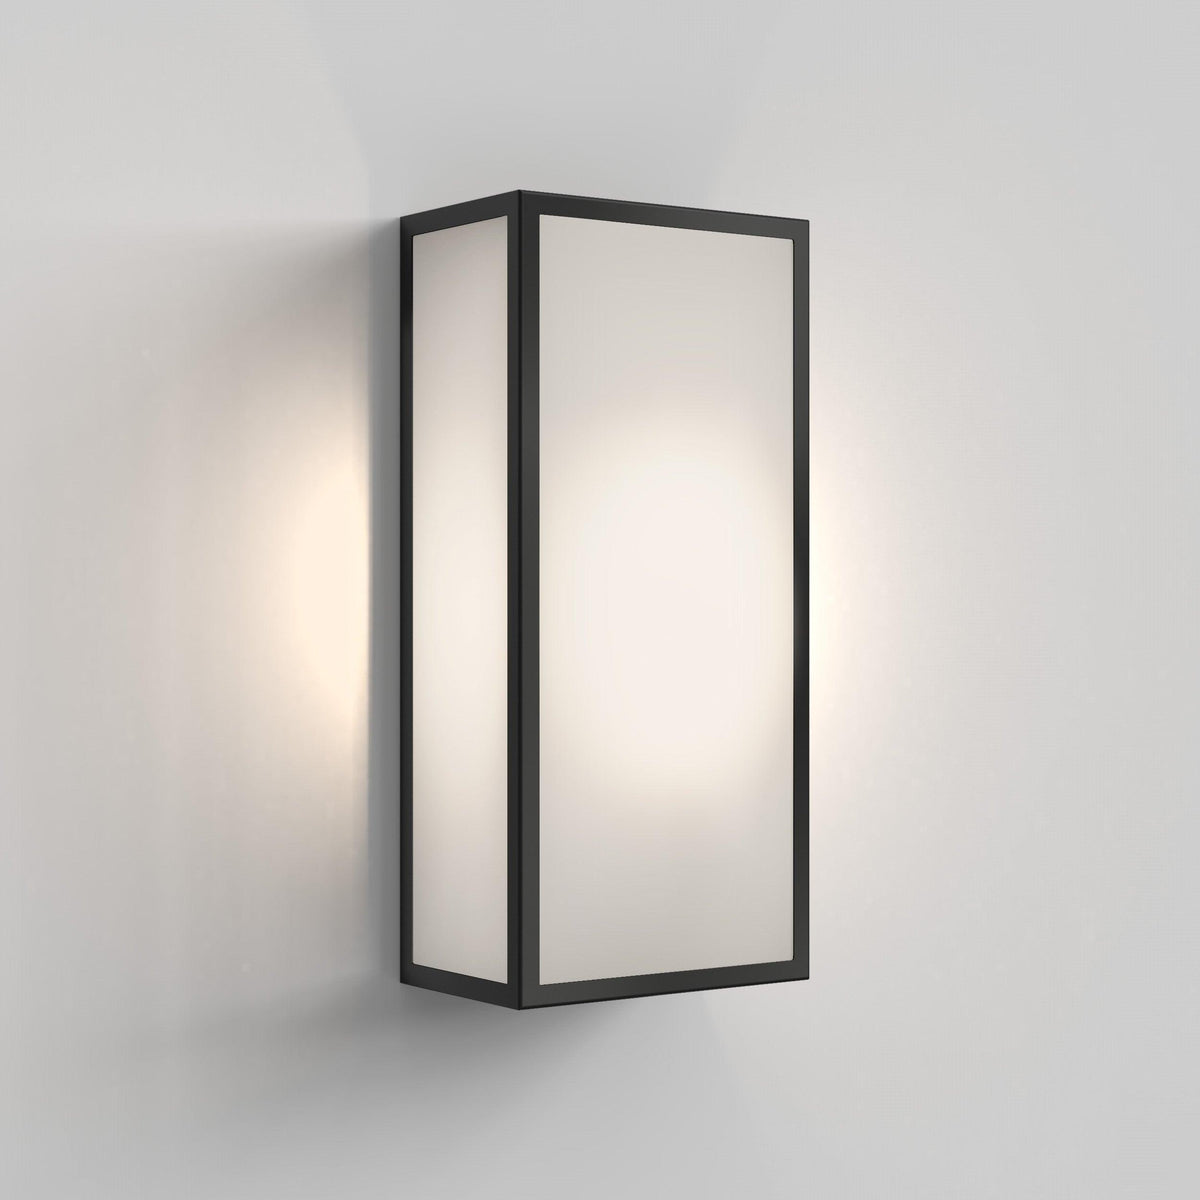 Astro Lighting - Messina Frosted Wall Light - 1183014 | Montreal Lighting & Hardware